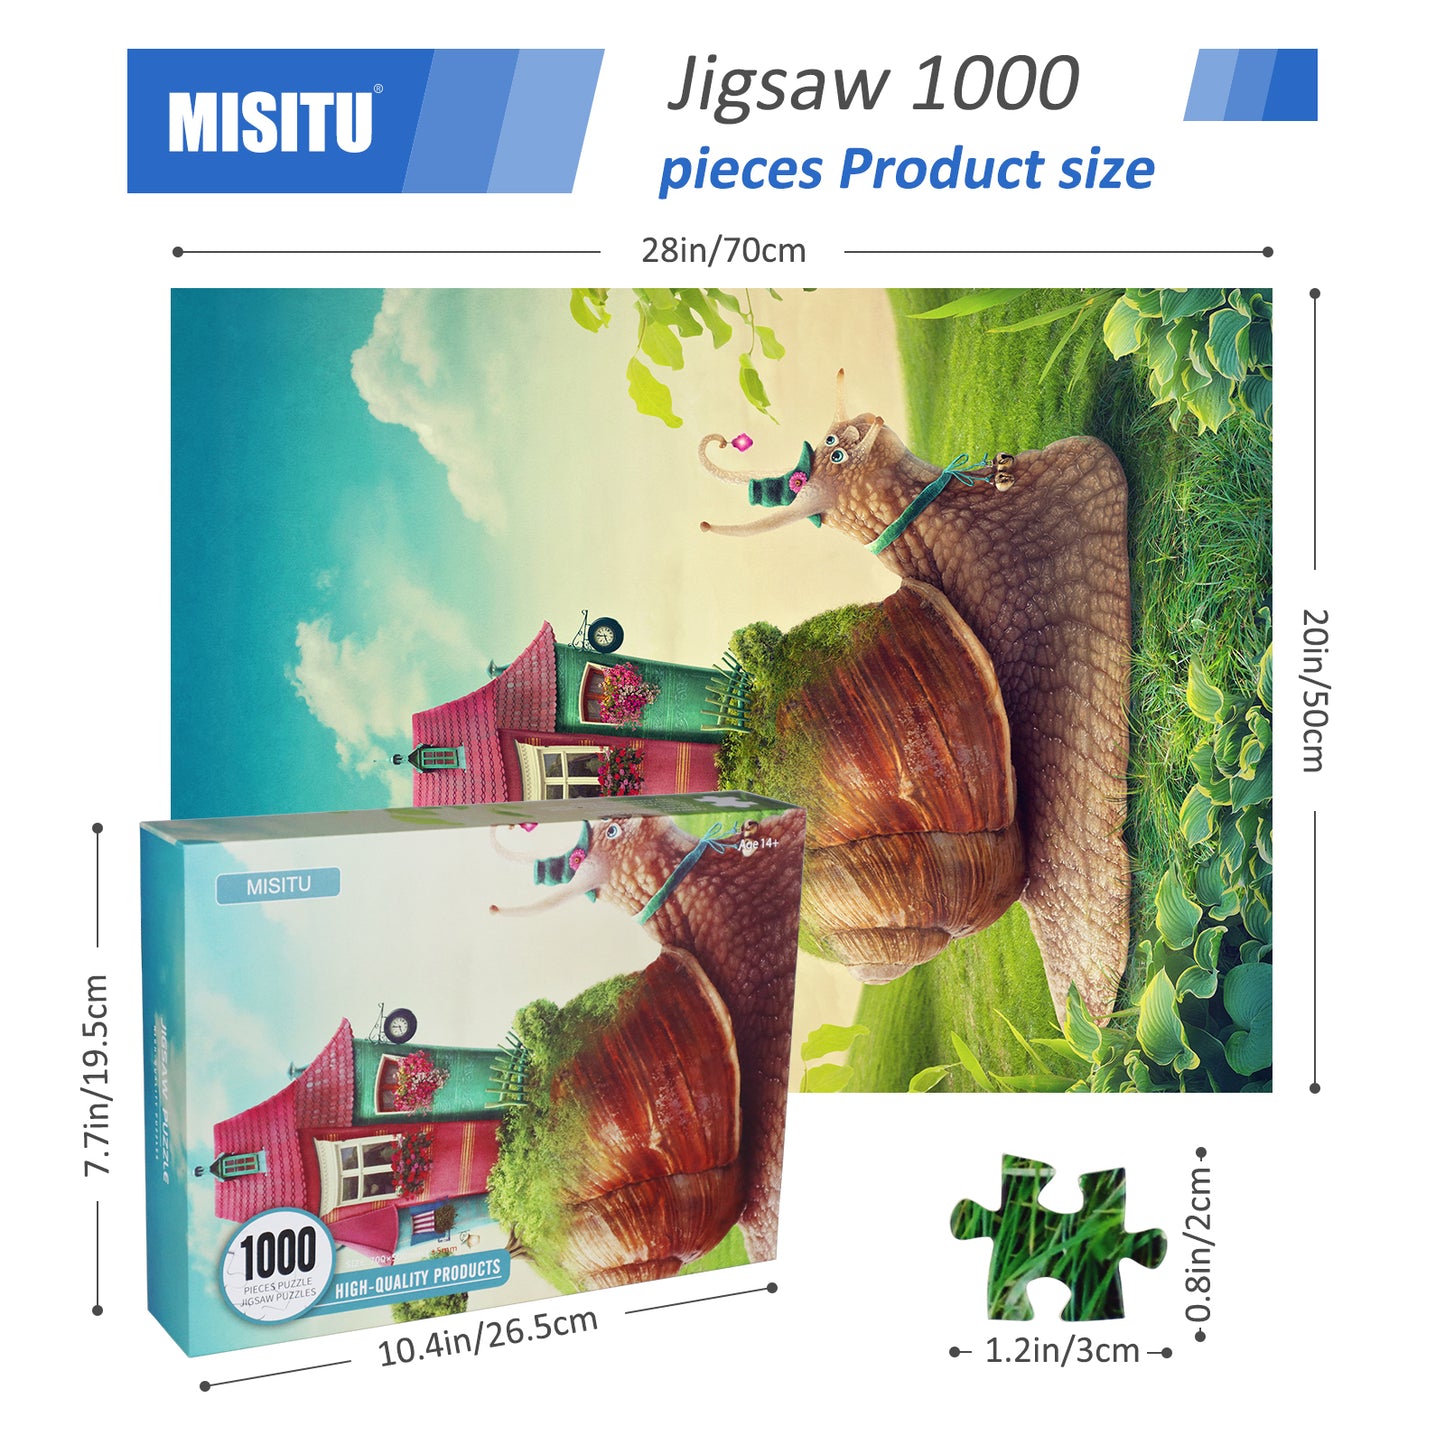 MISITU Jigsaw Puzzles 1000 Pieces - Snail House - Cartoon Puzzles 28 x 20 Inches